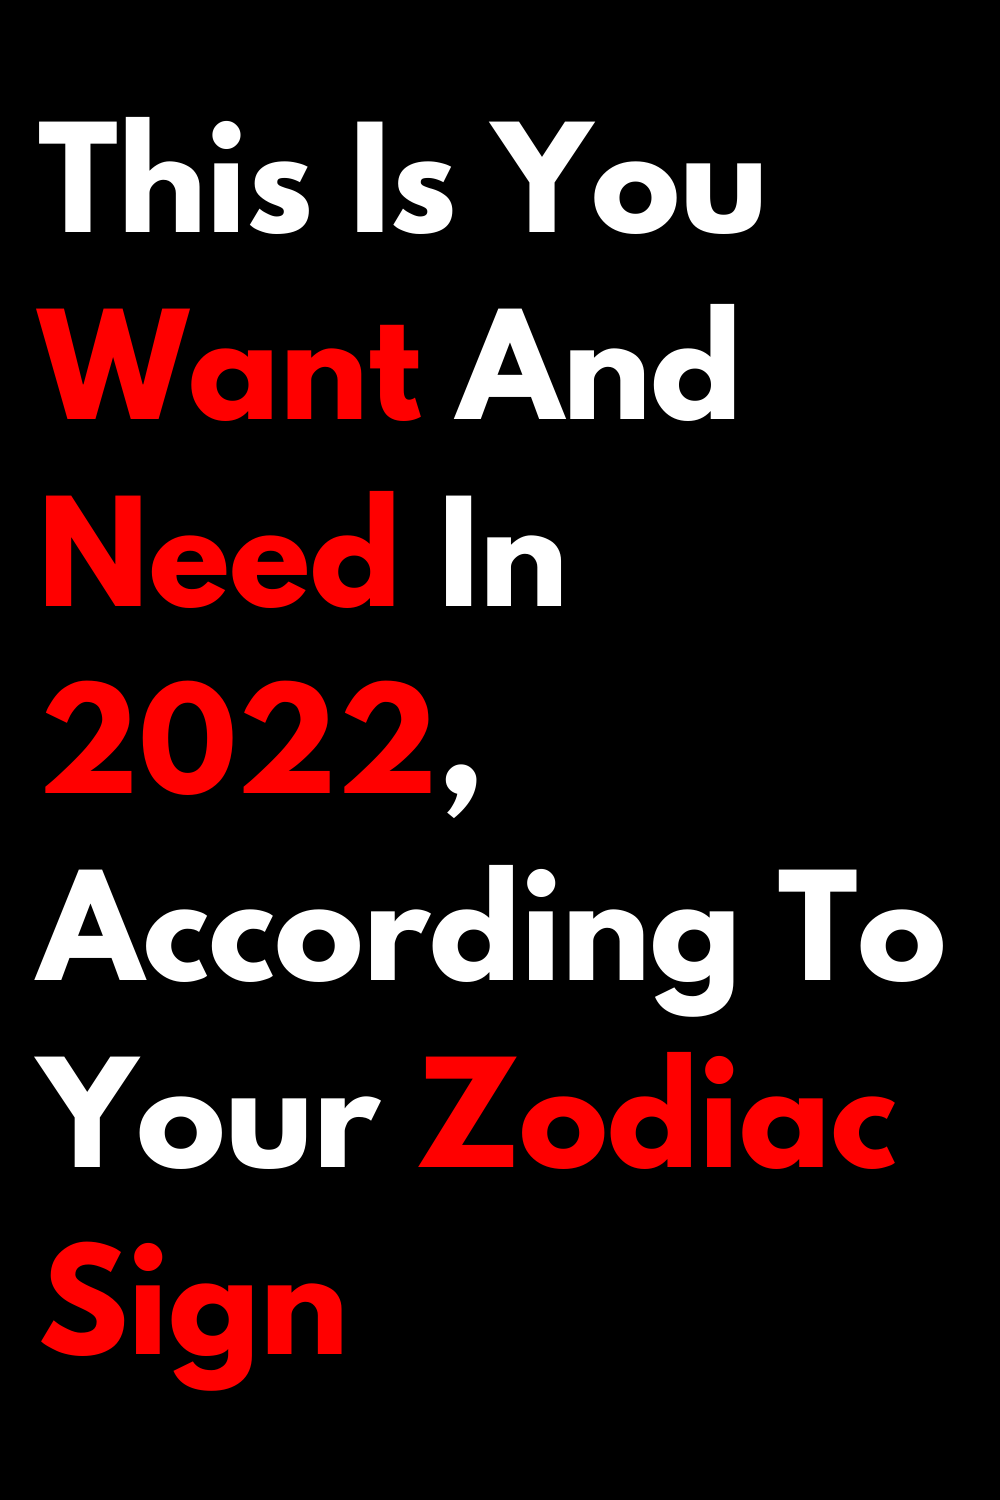 This Is You Want And Need In 2022, According To Your Zodiac Sign